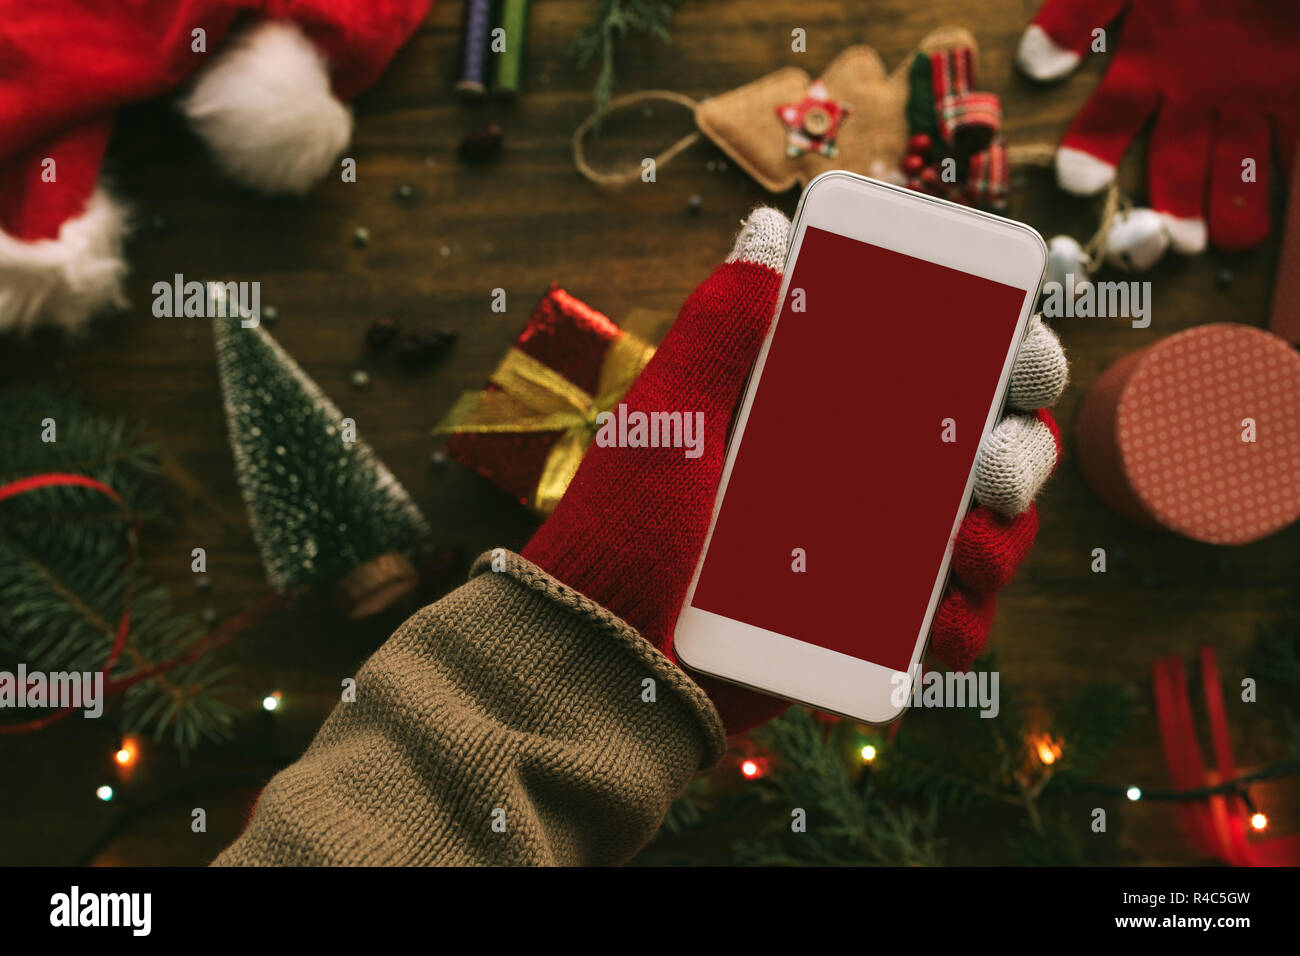 Smartphone in hand for Christmas season mock up with festive holiday decoration in background. Stock Photo